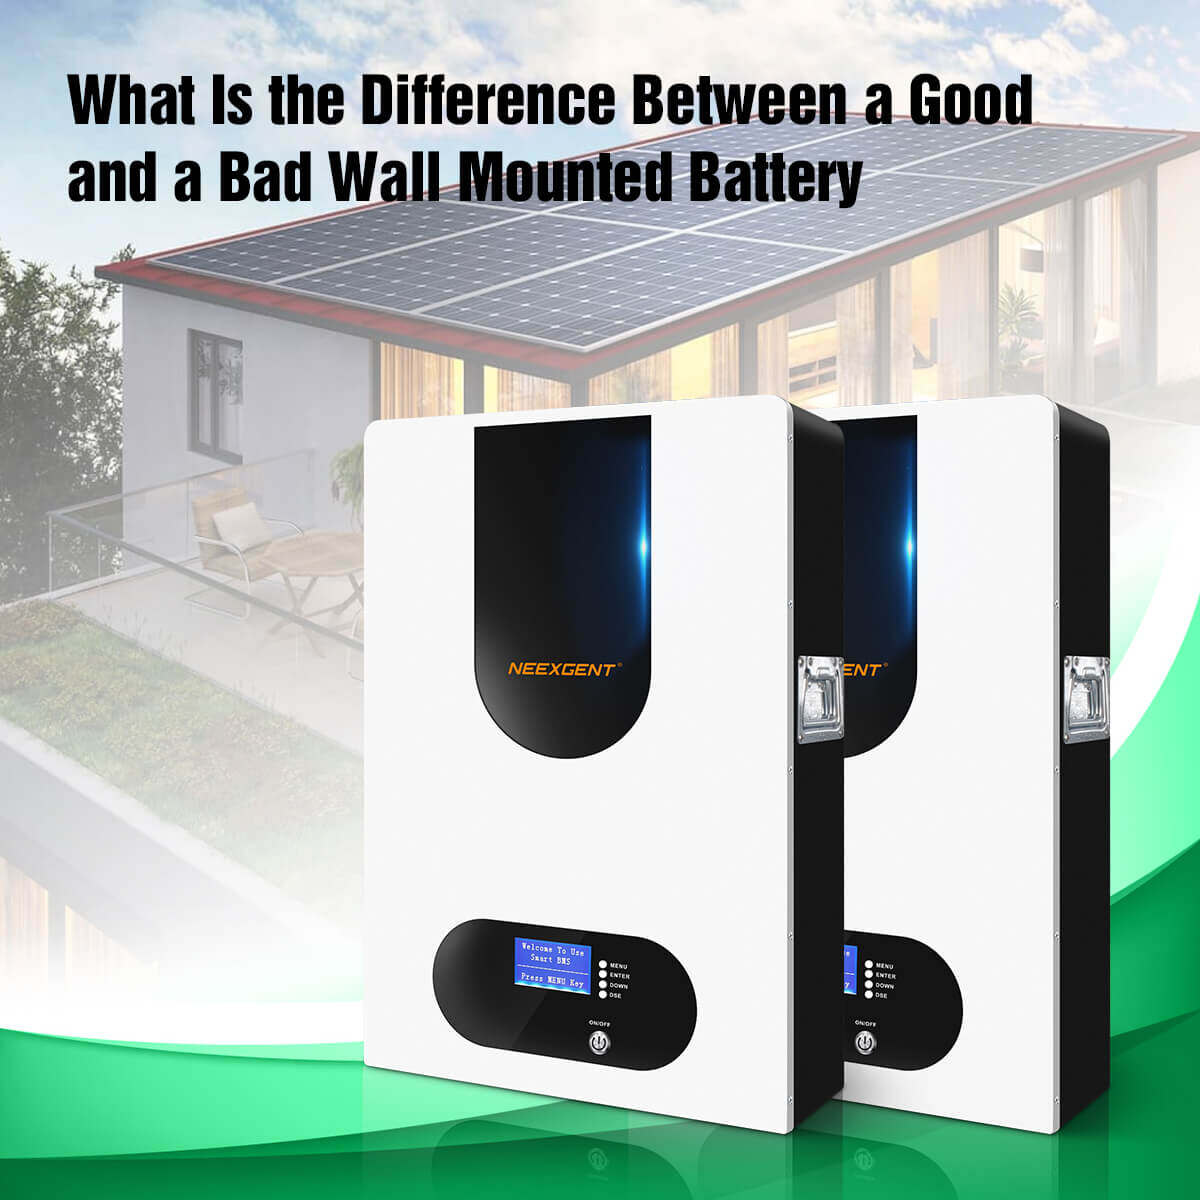 What Is the Difference Between a Good and a Bad Wall Mounted Battery